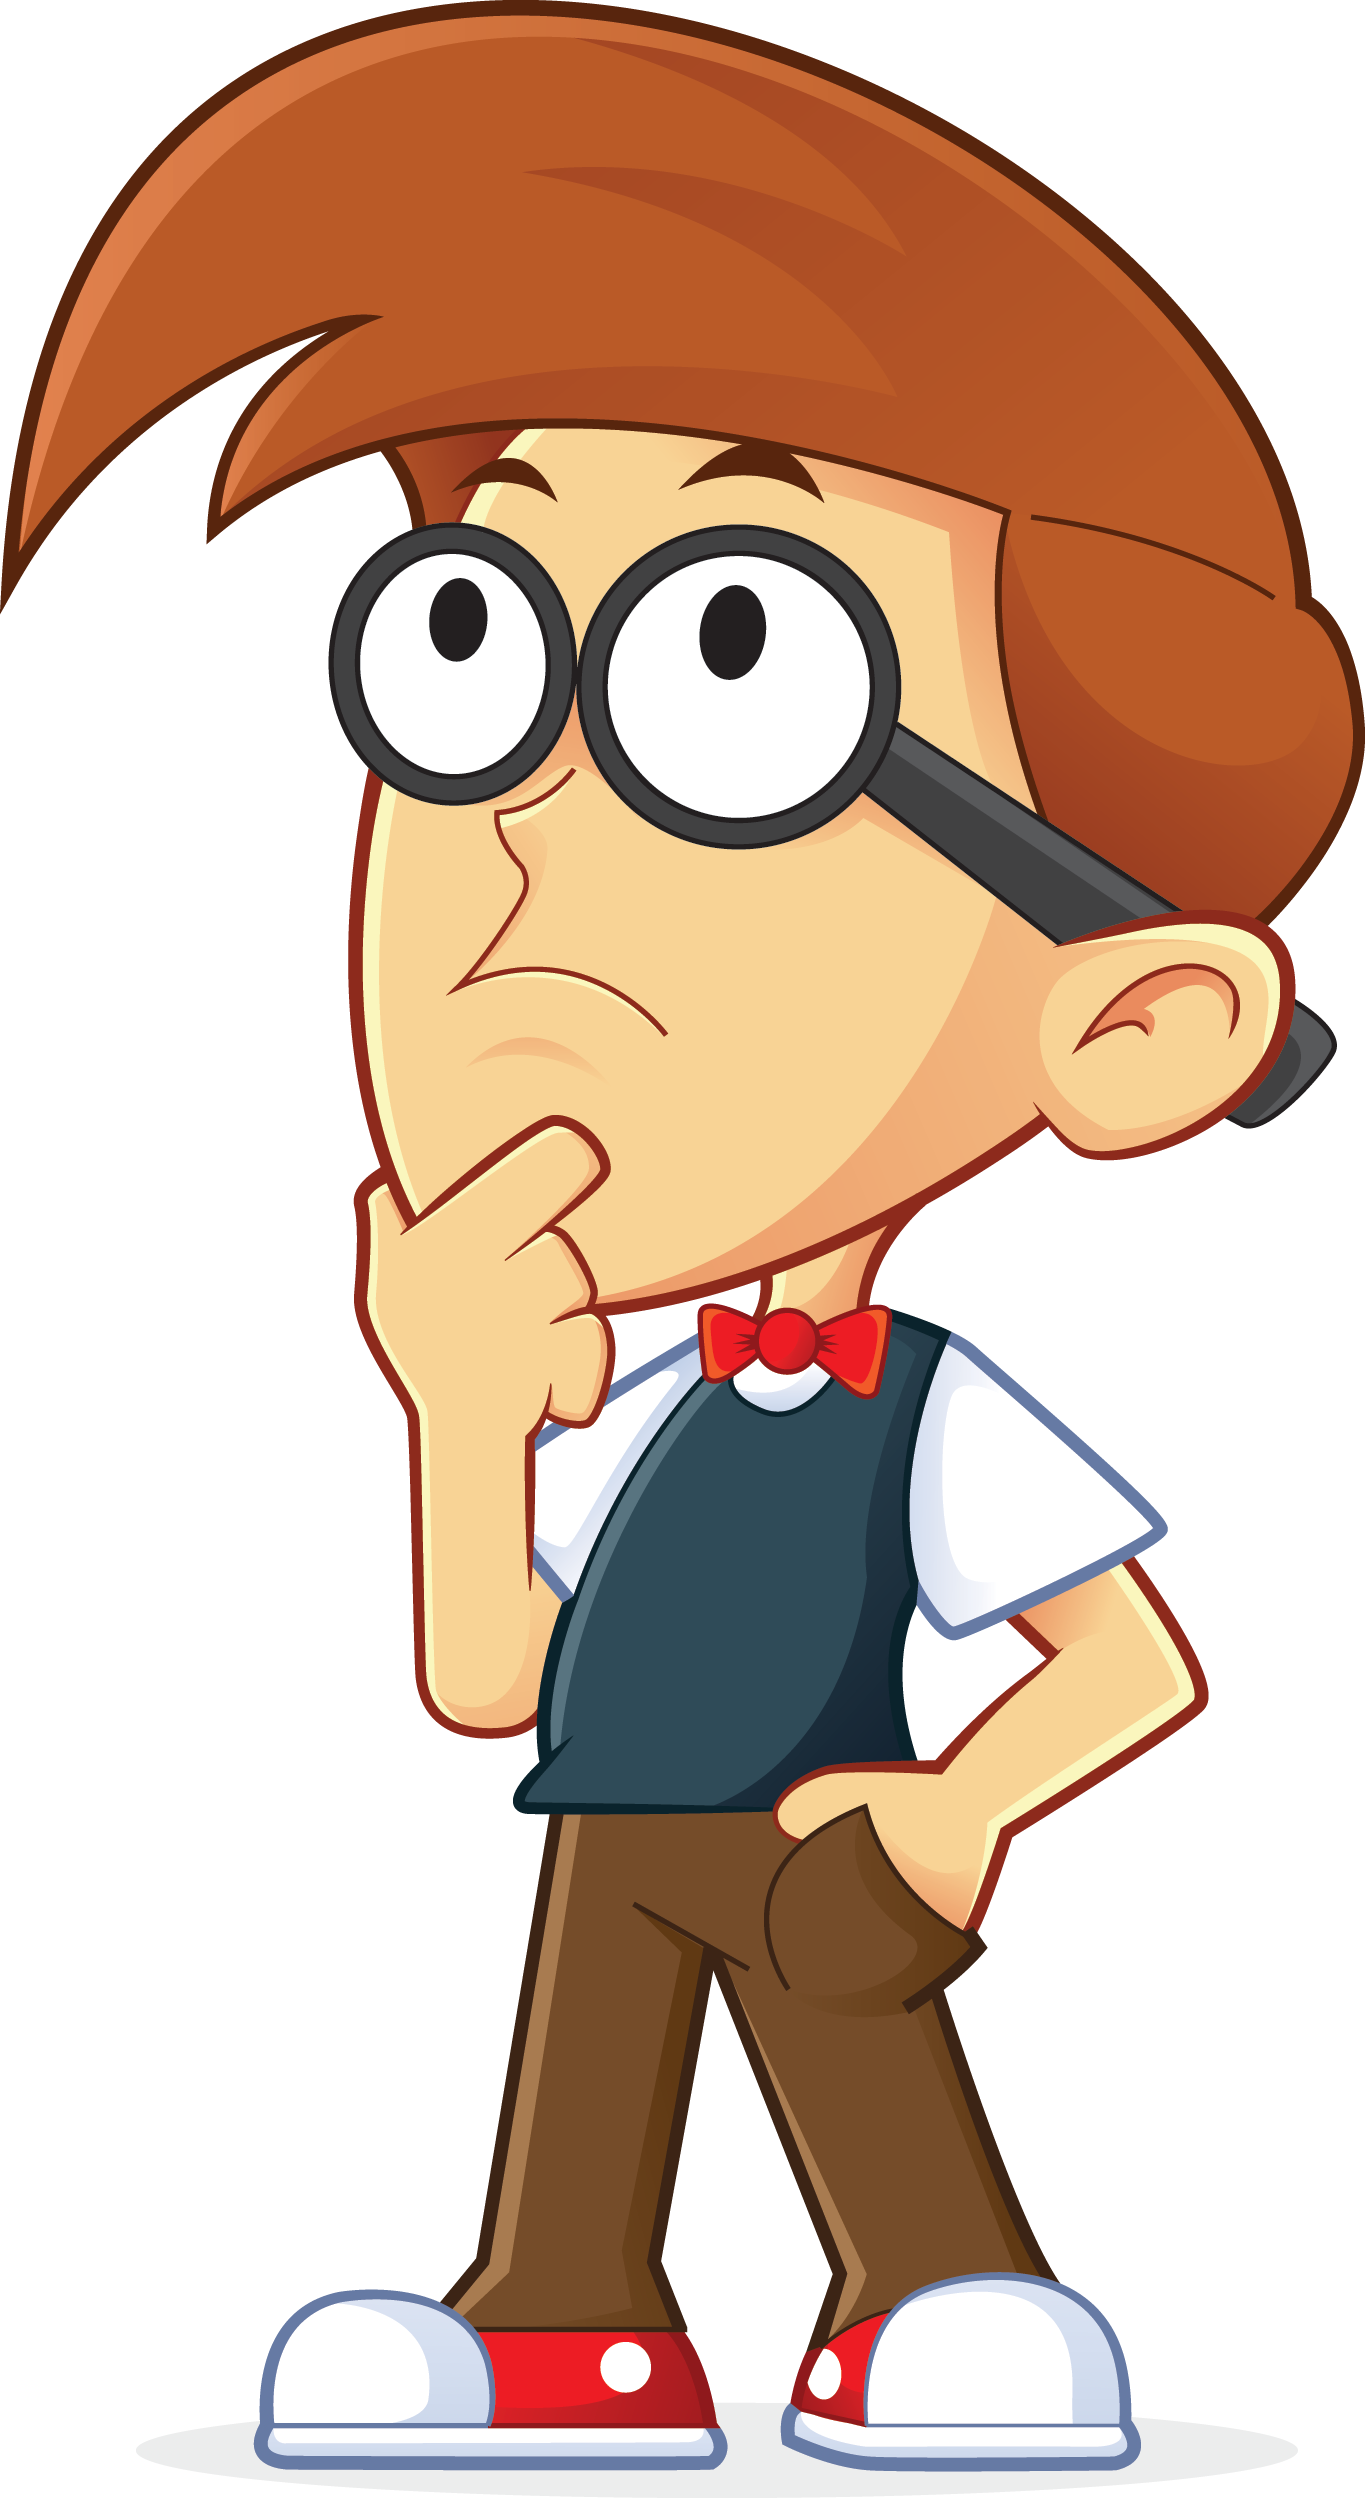 A Cartoon Of A Boy With Glasses And A Bow Tie